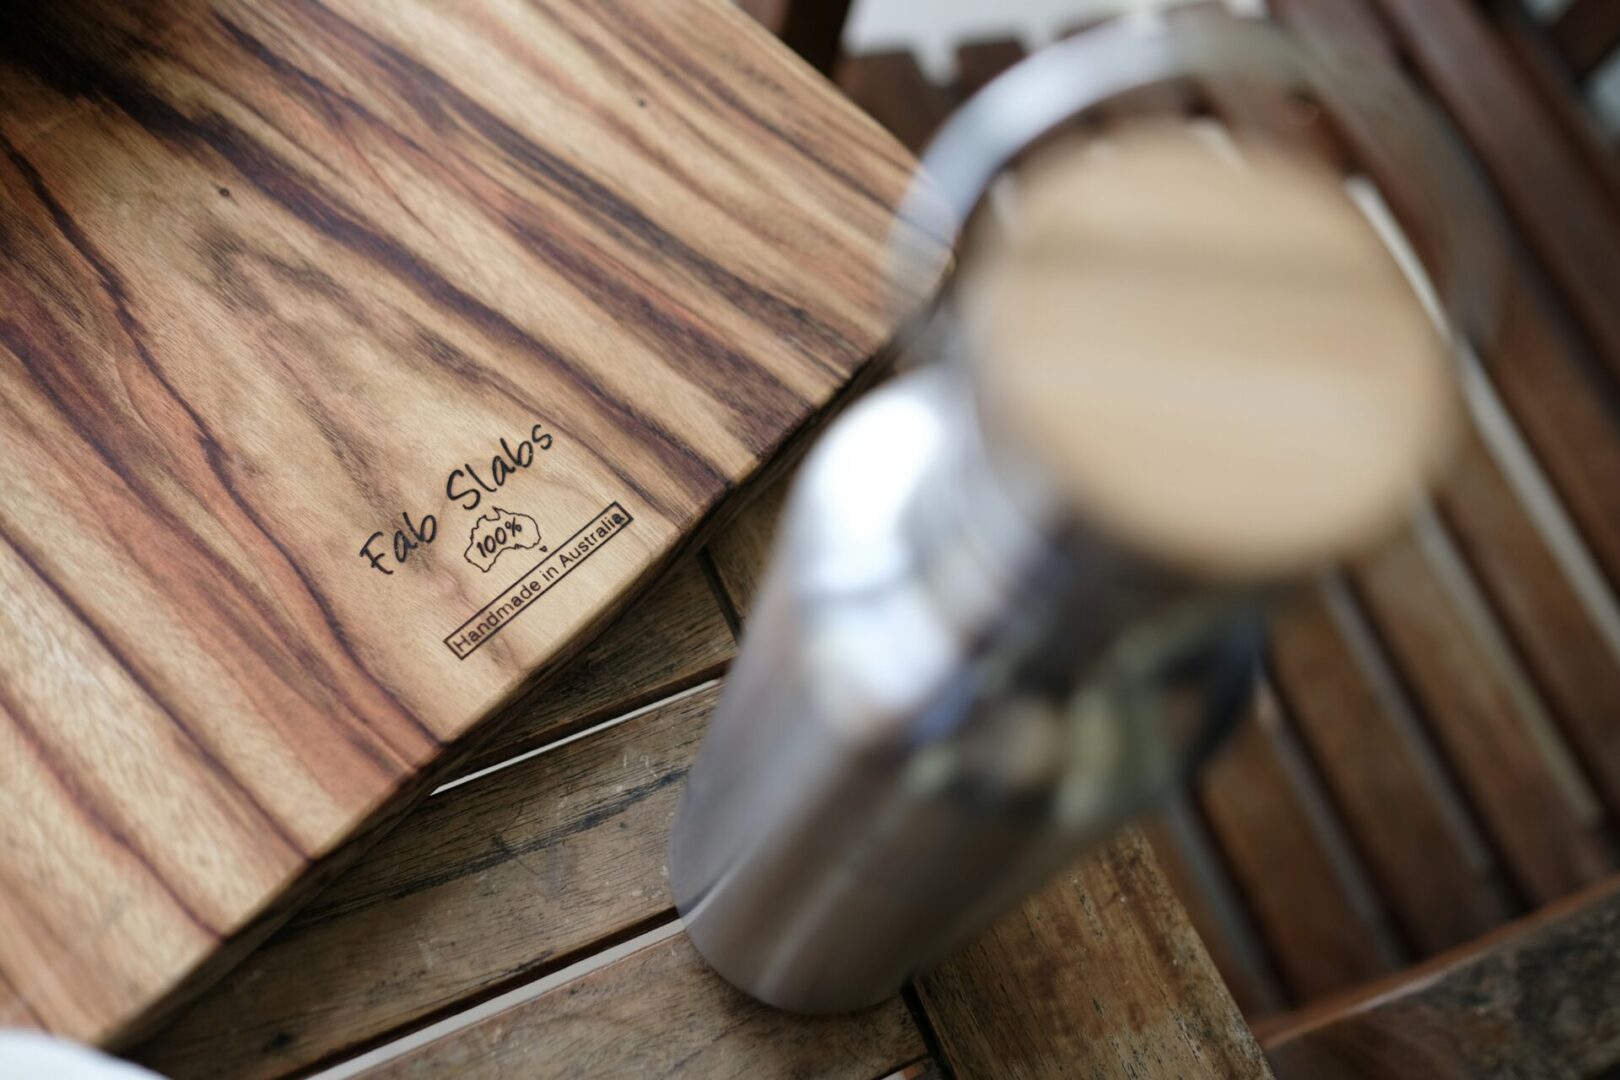 A wooden cutting board and a metal can on top of a table.